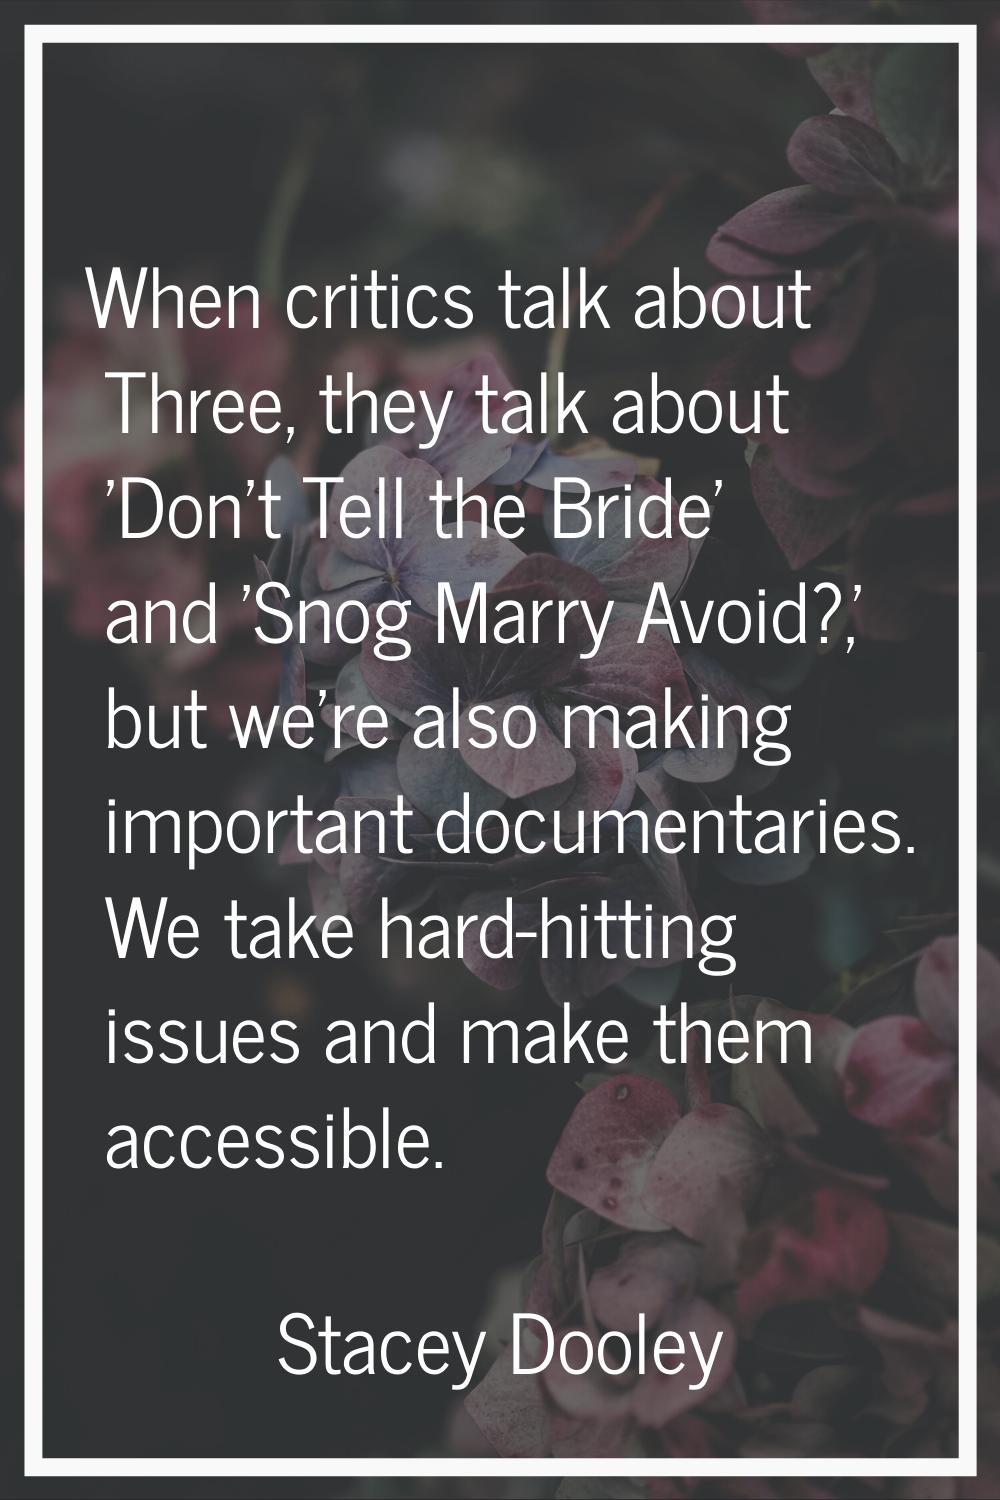 When critics talk about Three, they talk about 'Don't Tell the Bride' and 'Snog Marry Avoid?,' but 